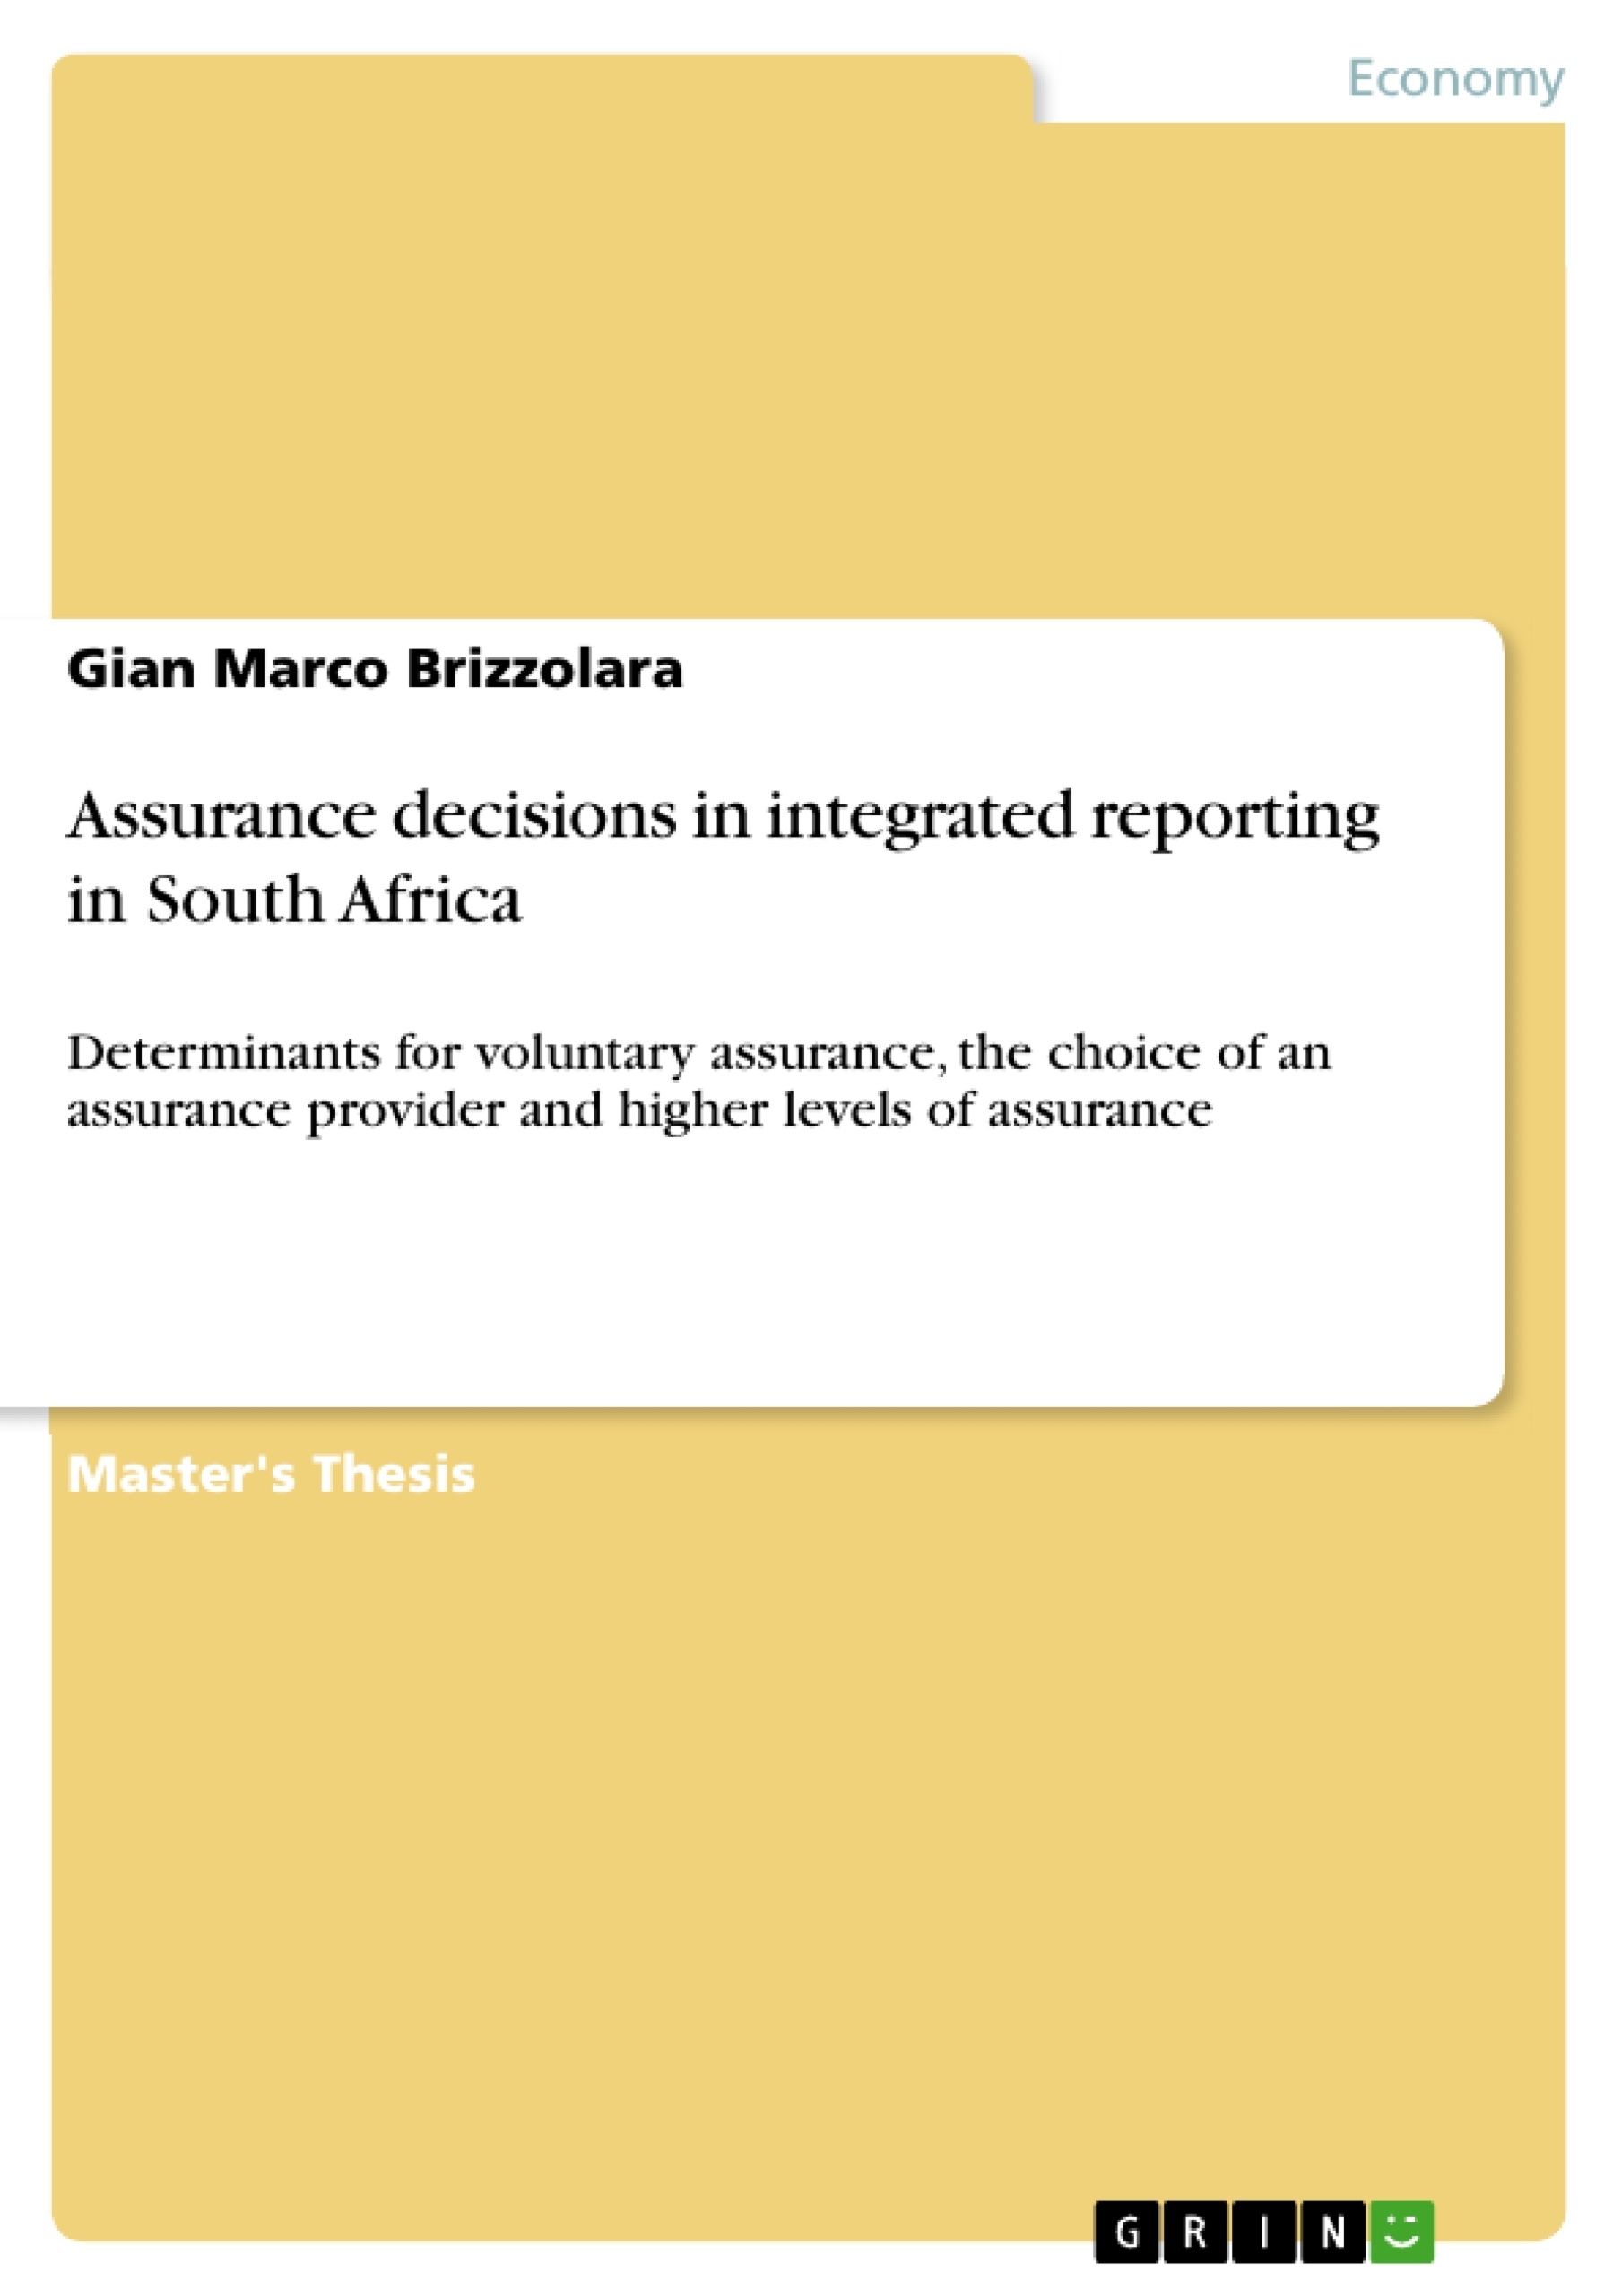 Title: Assurance decisions in integrated reporting in South Africa